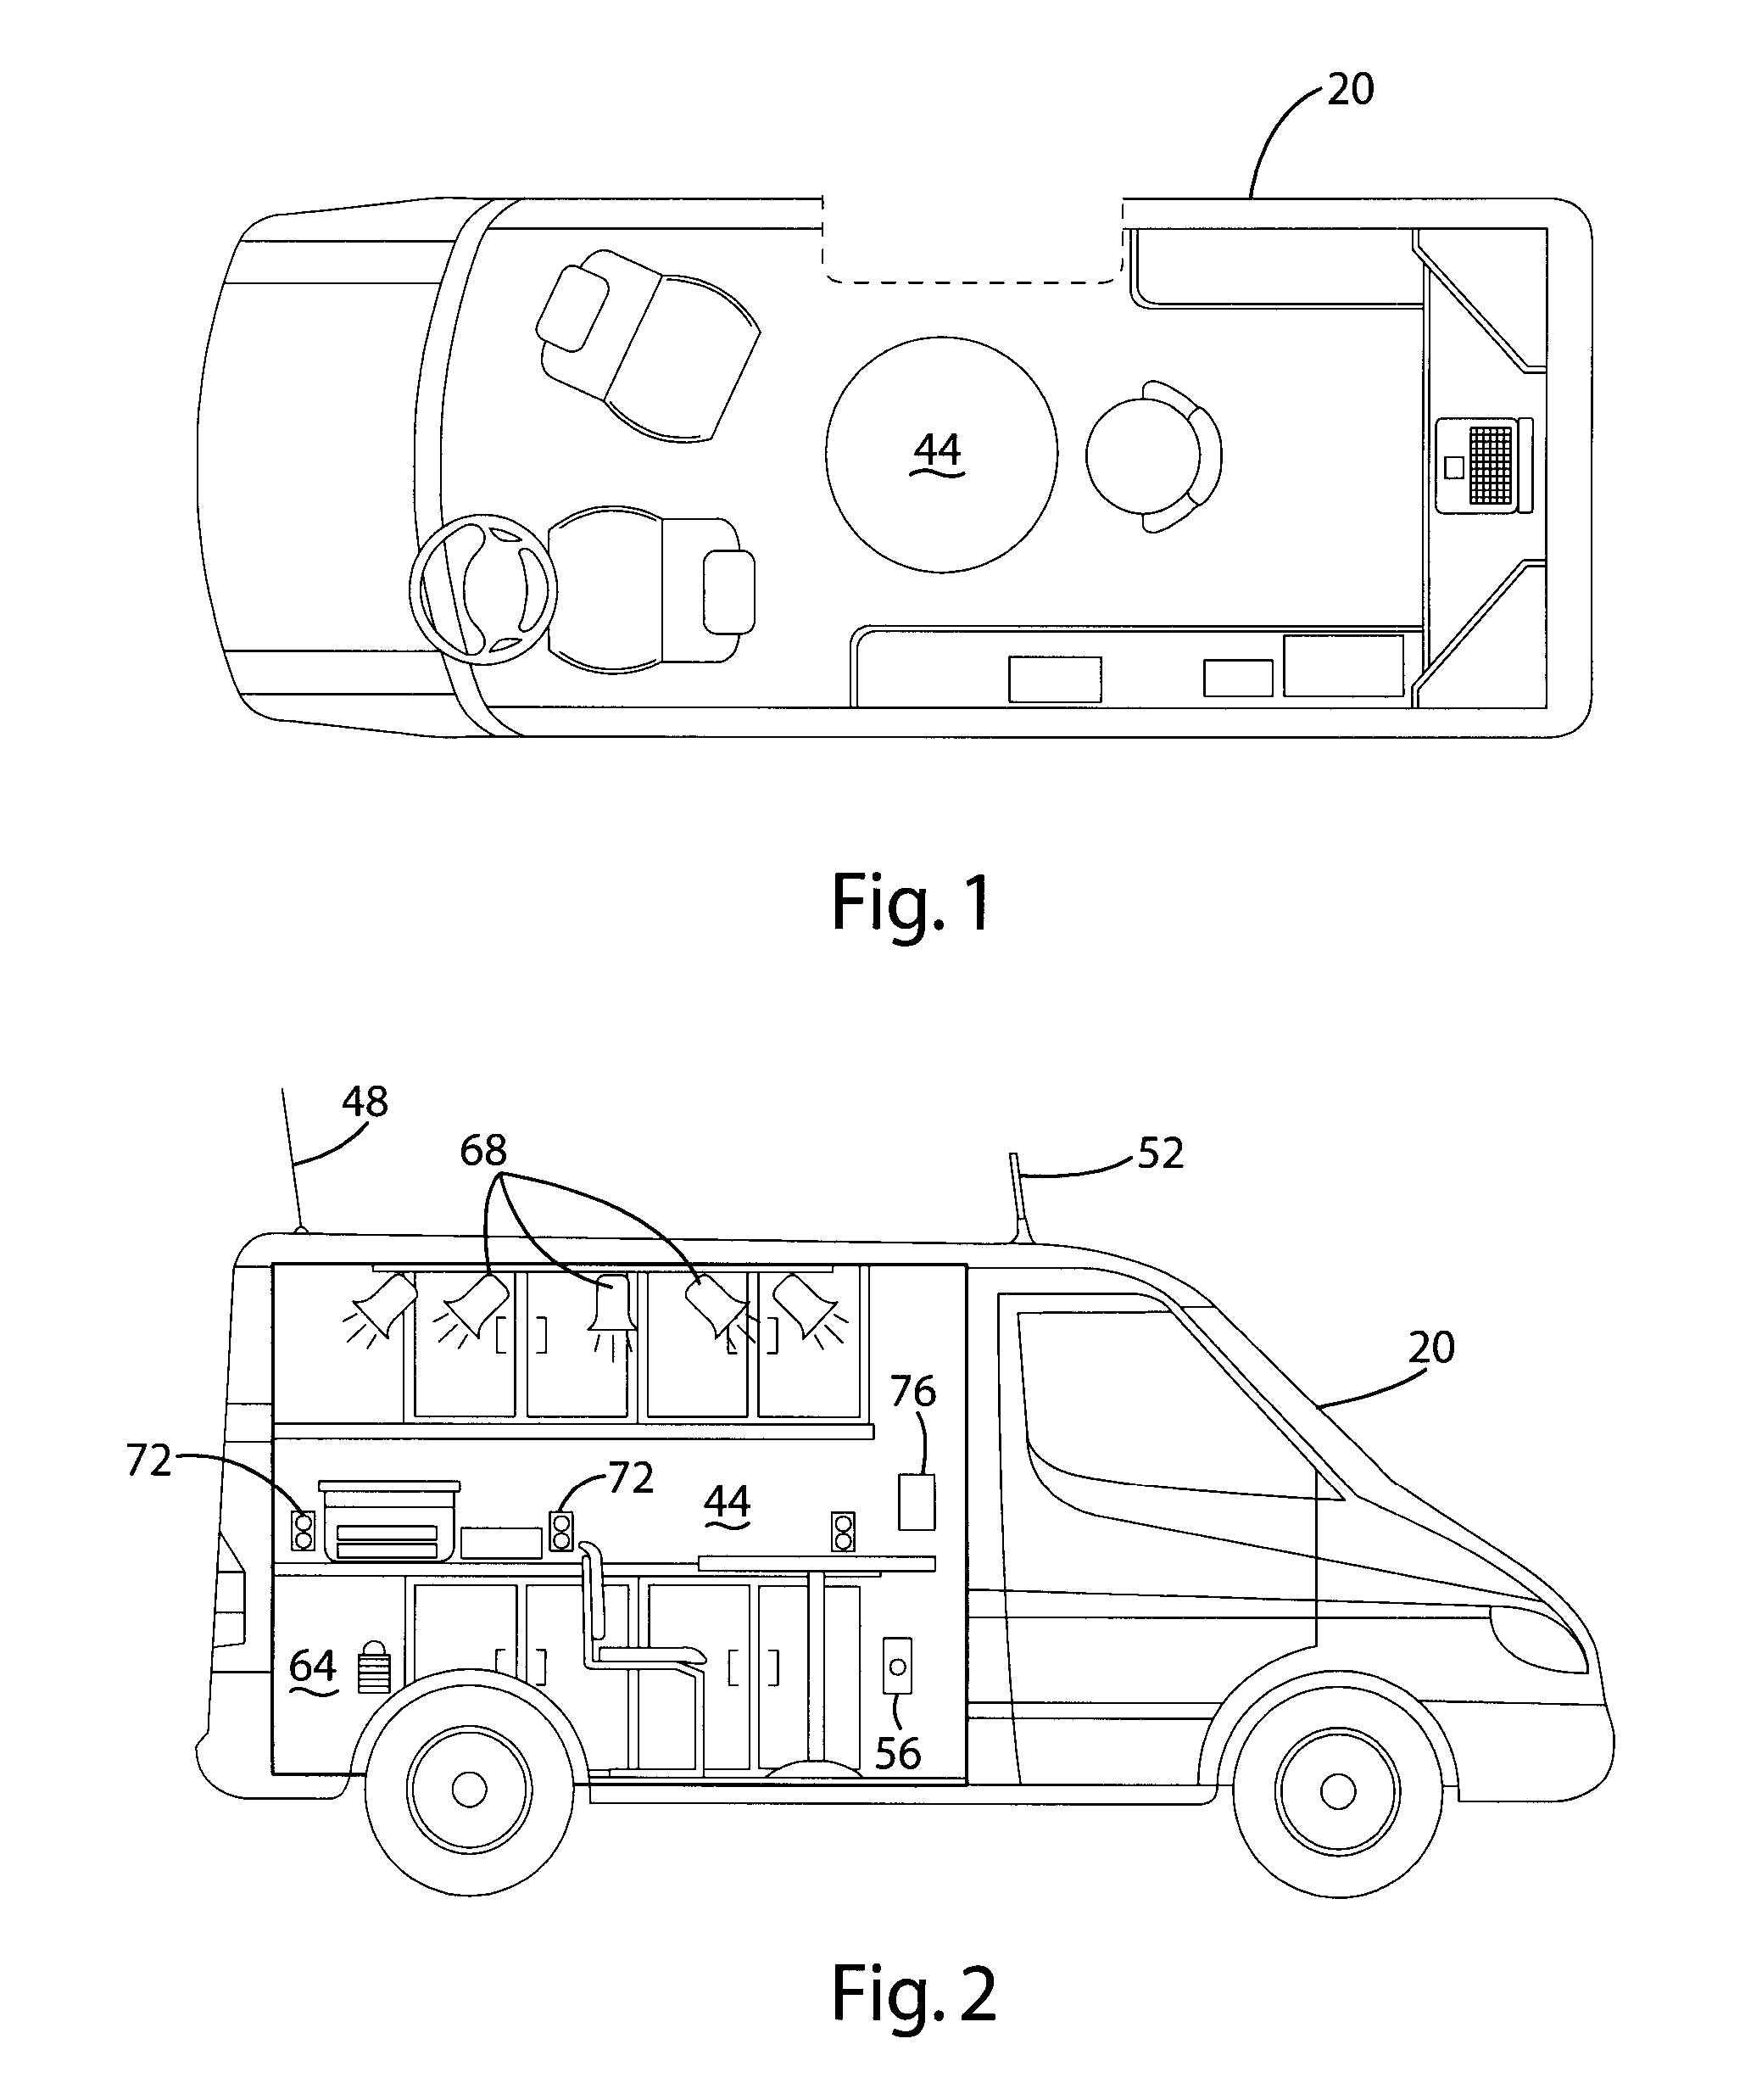 Mobile system and method for processing real estate transactions